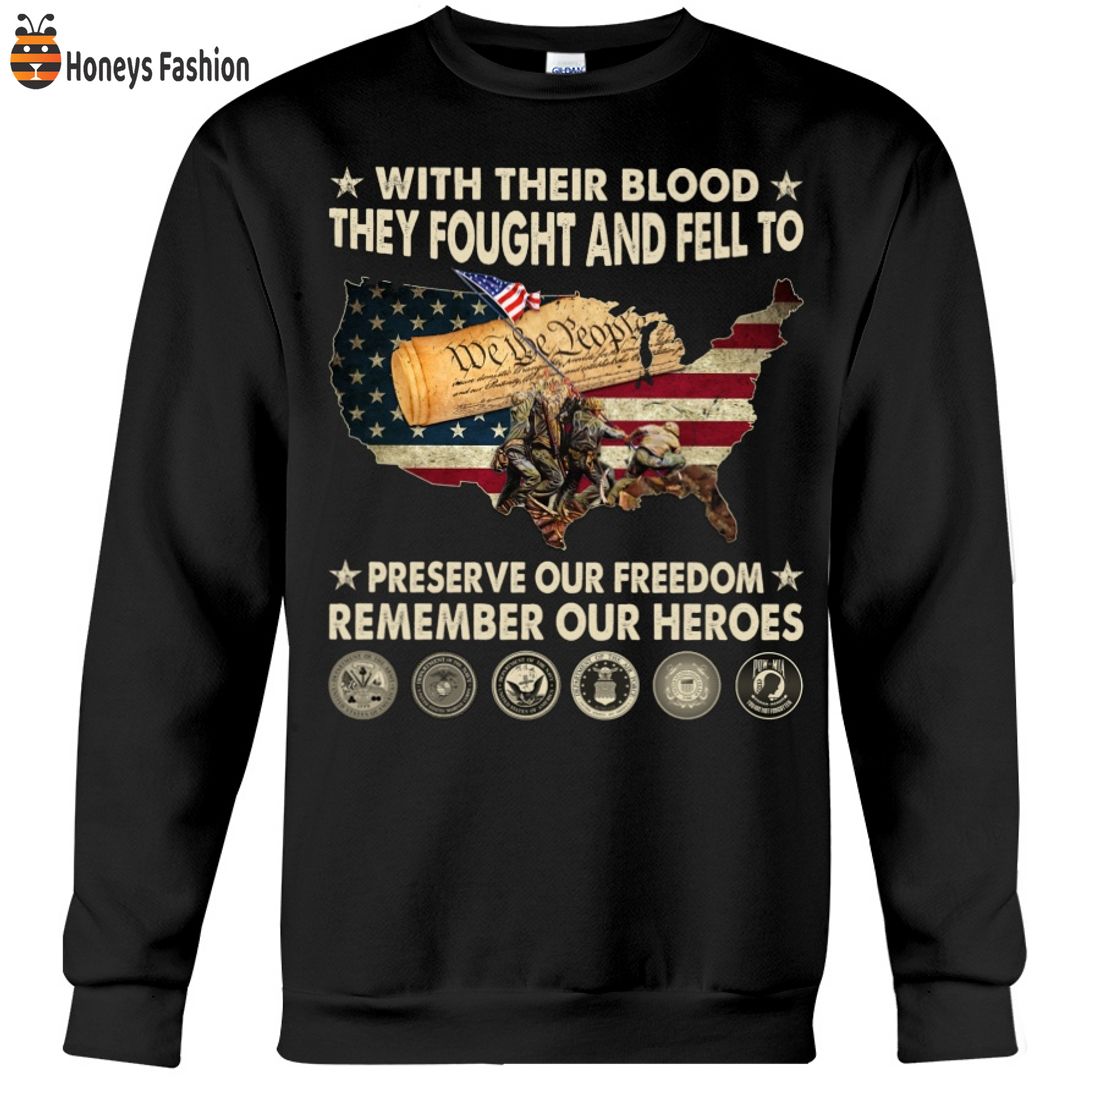 BEST SELLER With Their Blood They Fought And Fell Preserve Our Freedom 2D Hoodie Tshirt